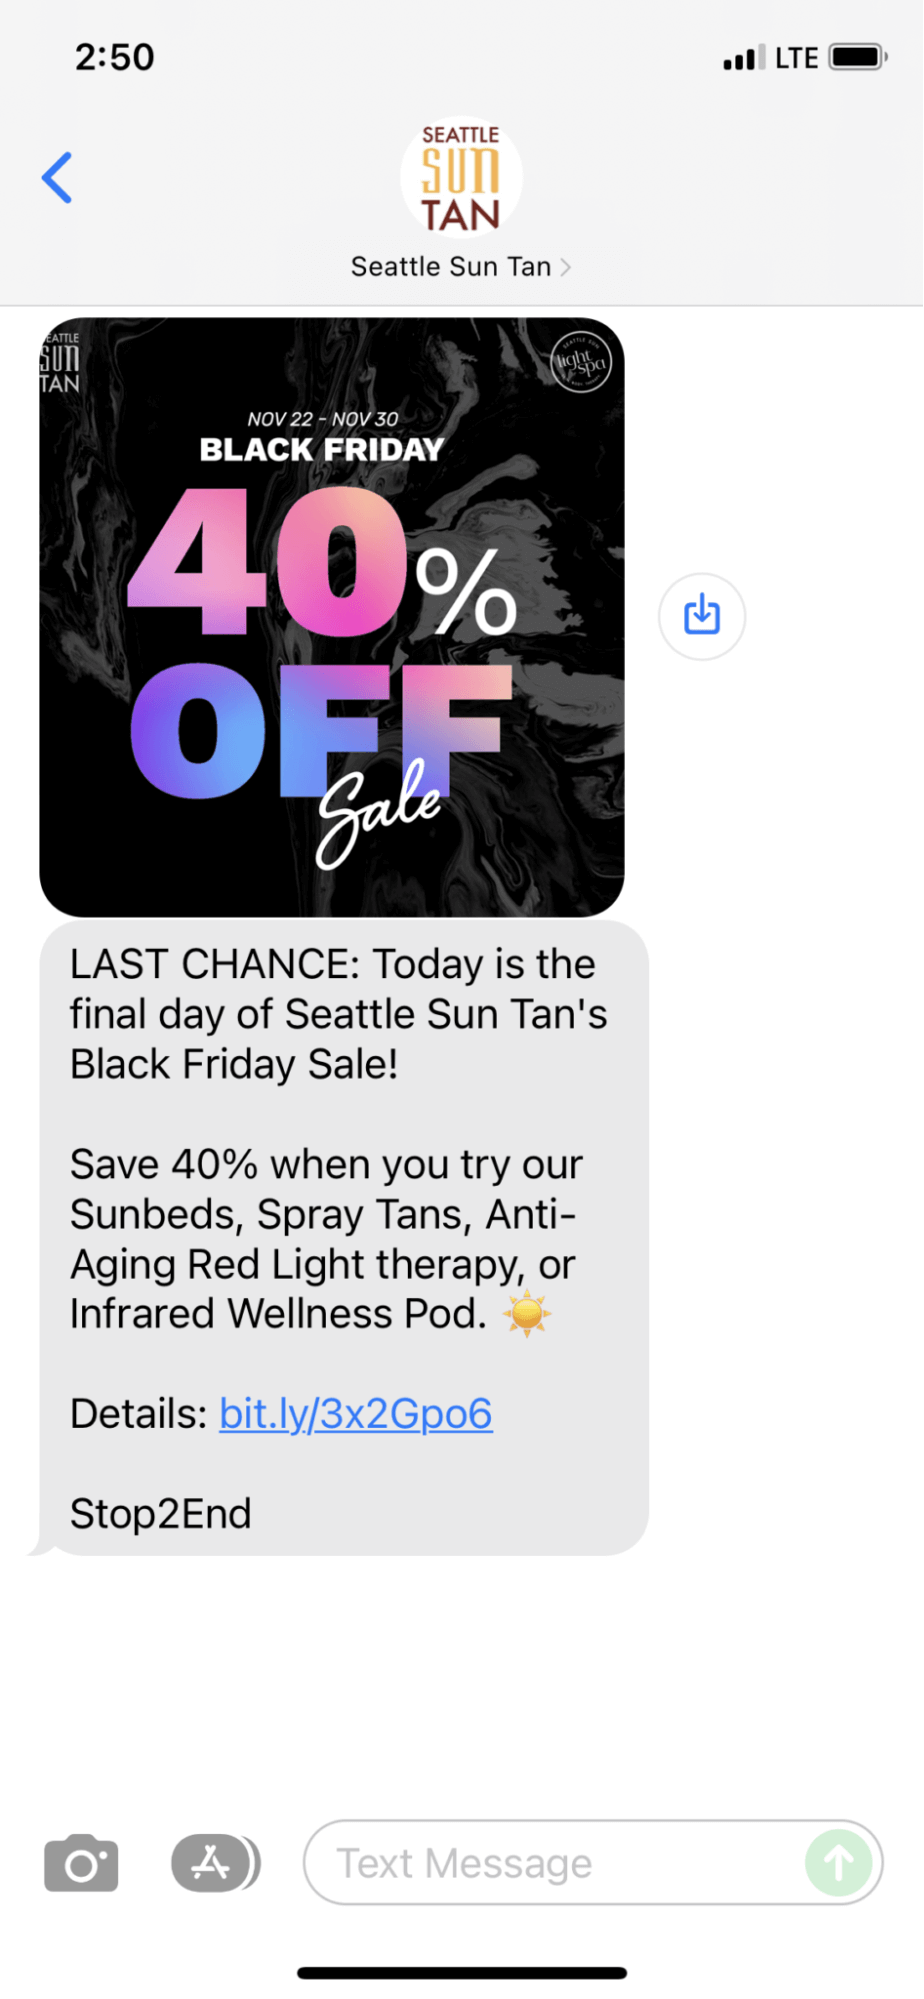 Black Friday SMS example from Seattle Sun Tan